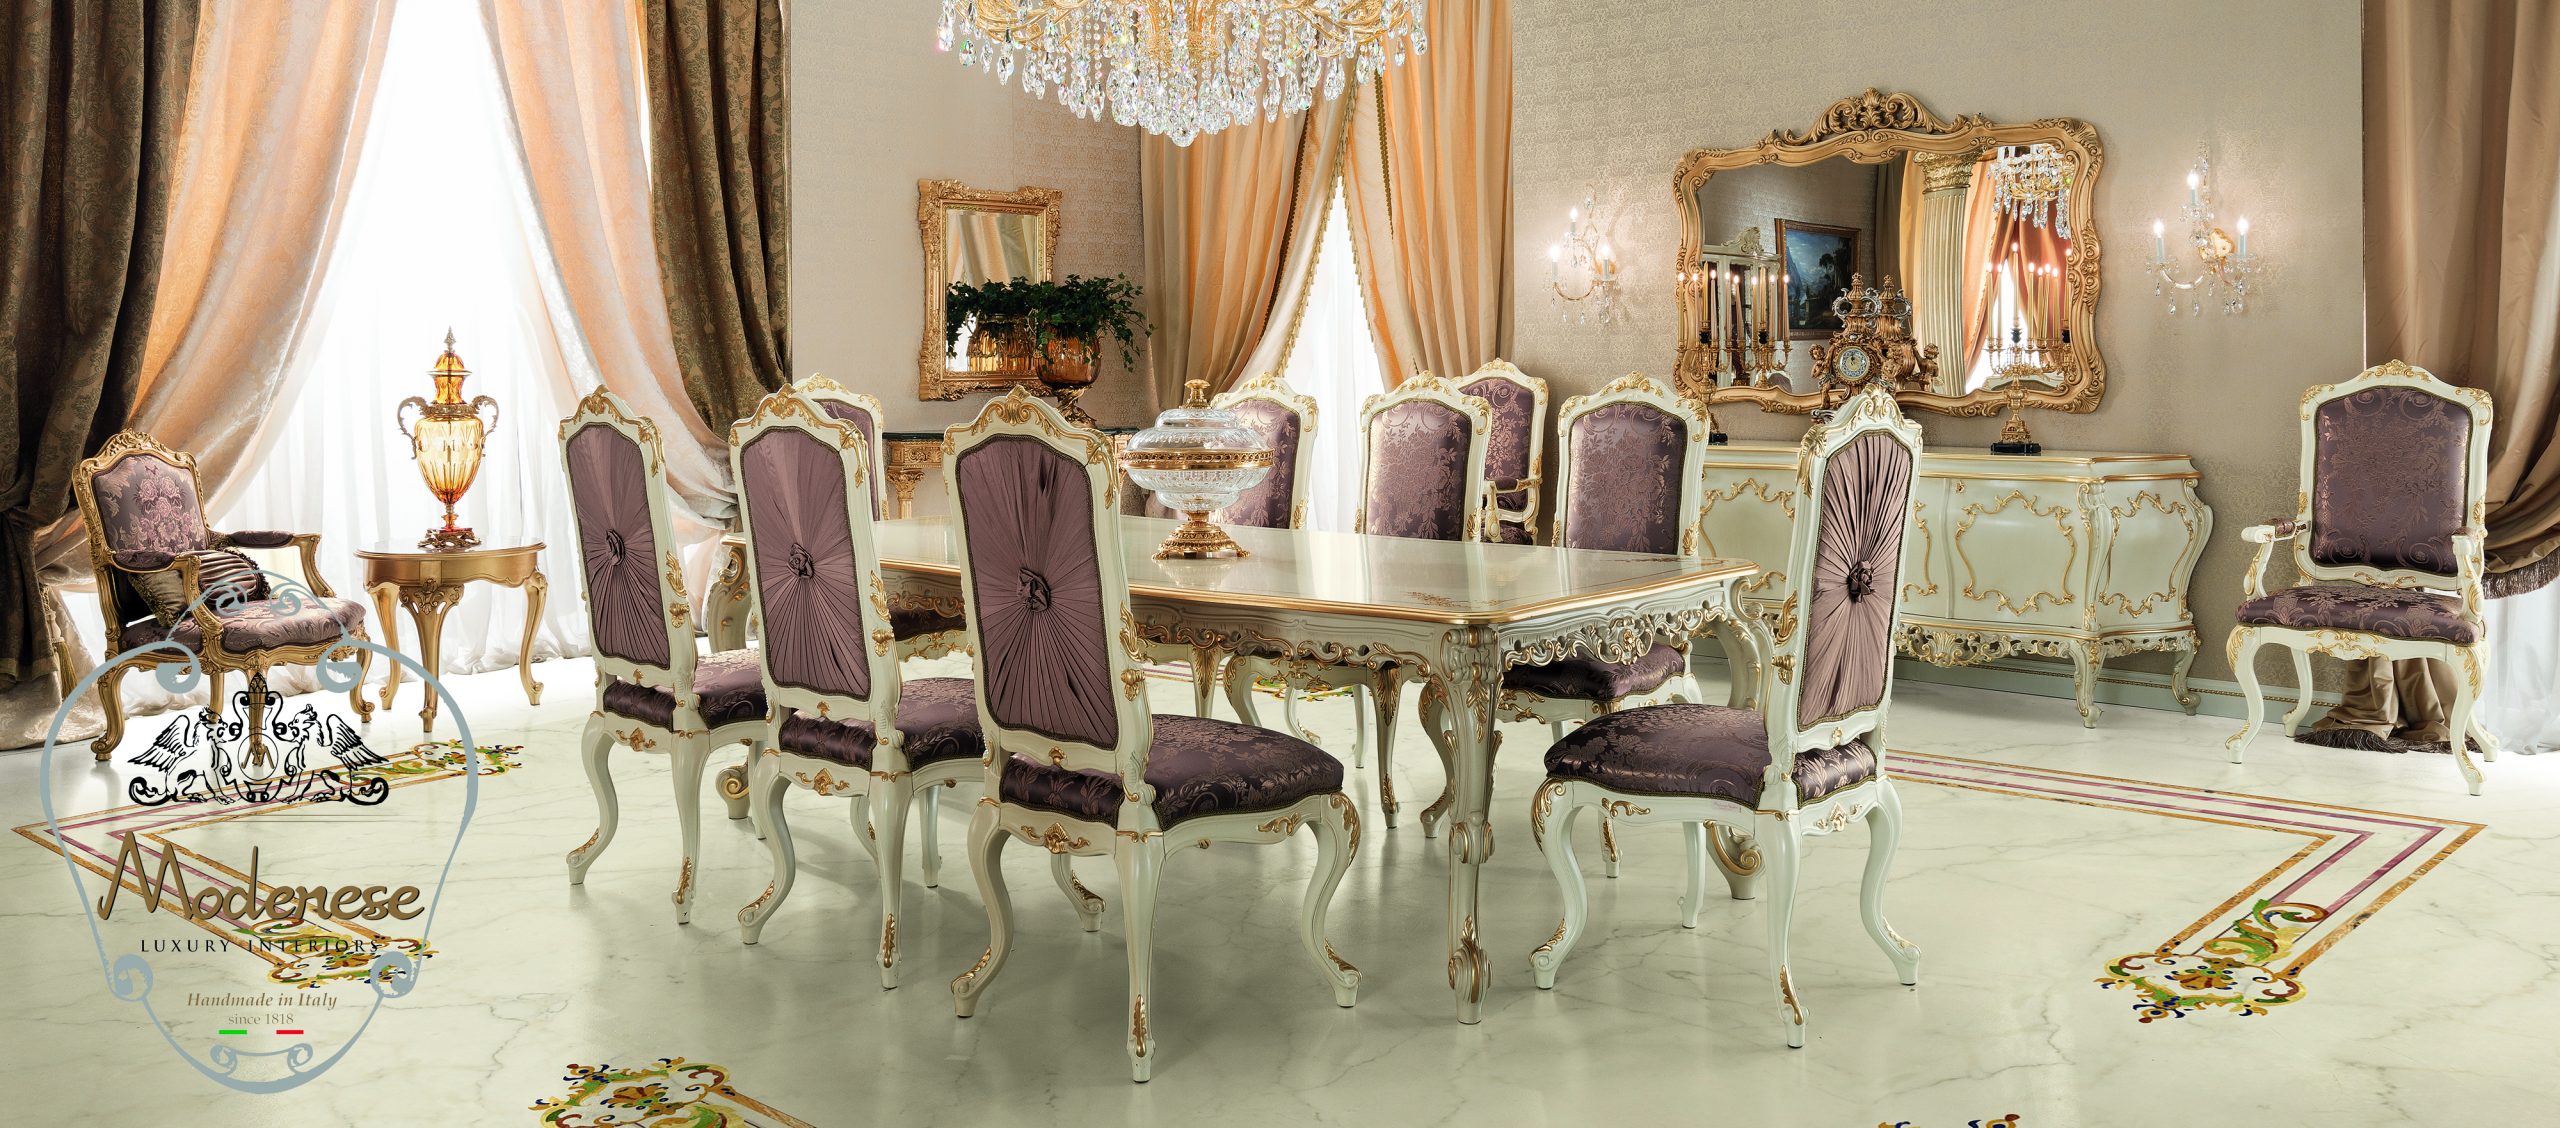 High-end quality, premium standards, luxury furniture design made in Italy. Traditional handcrafted furniture and best classical interior design projects.